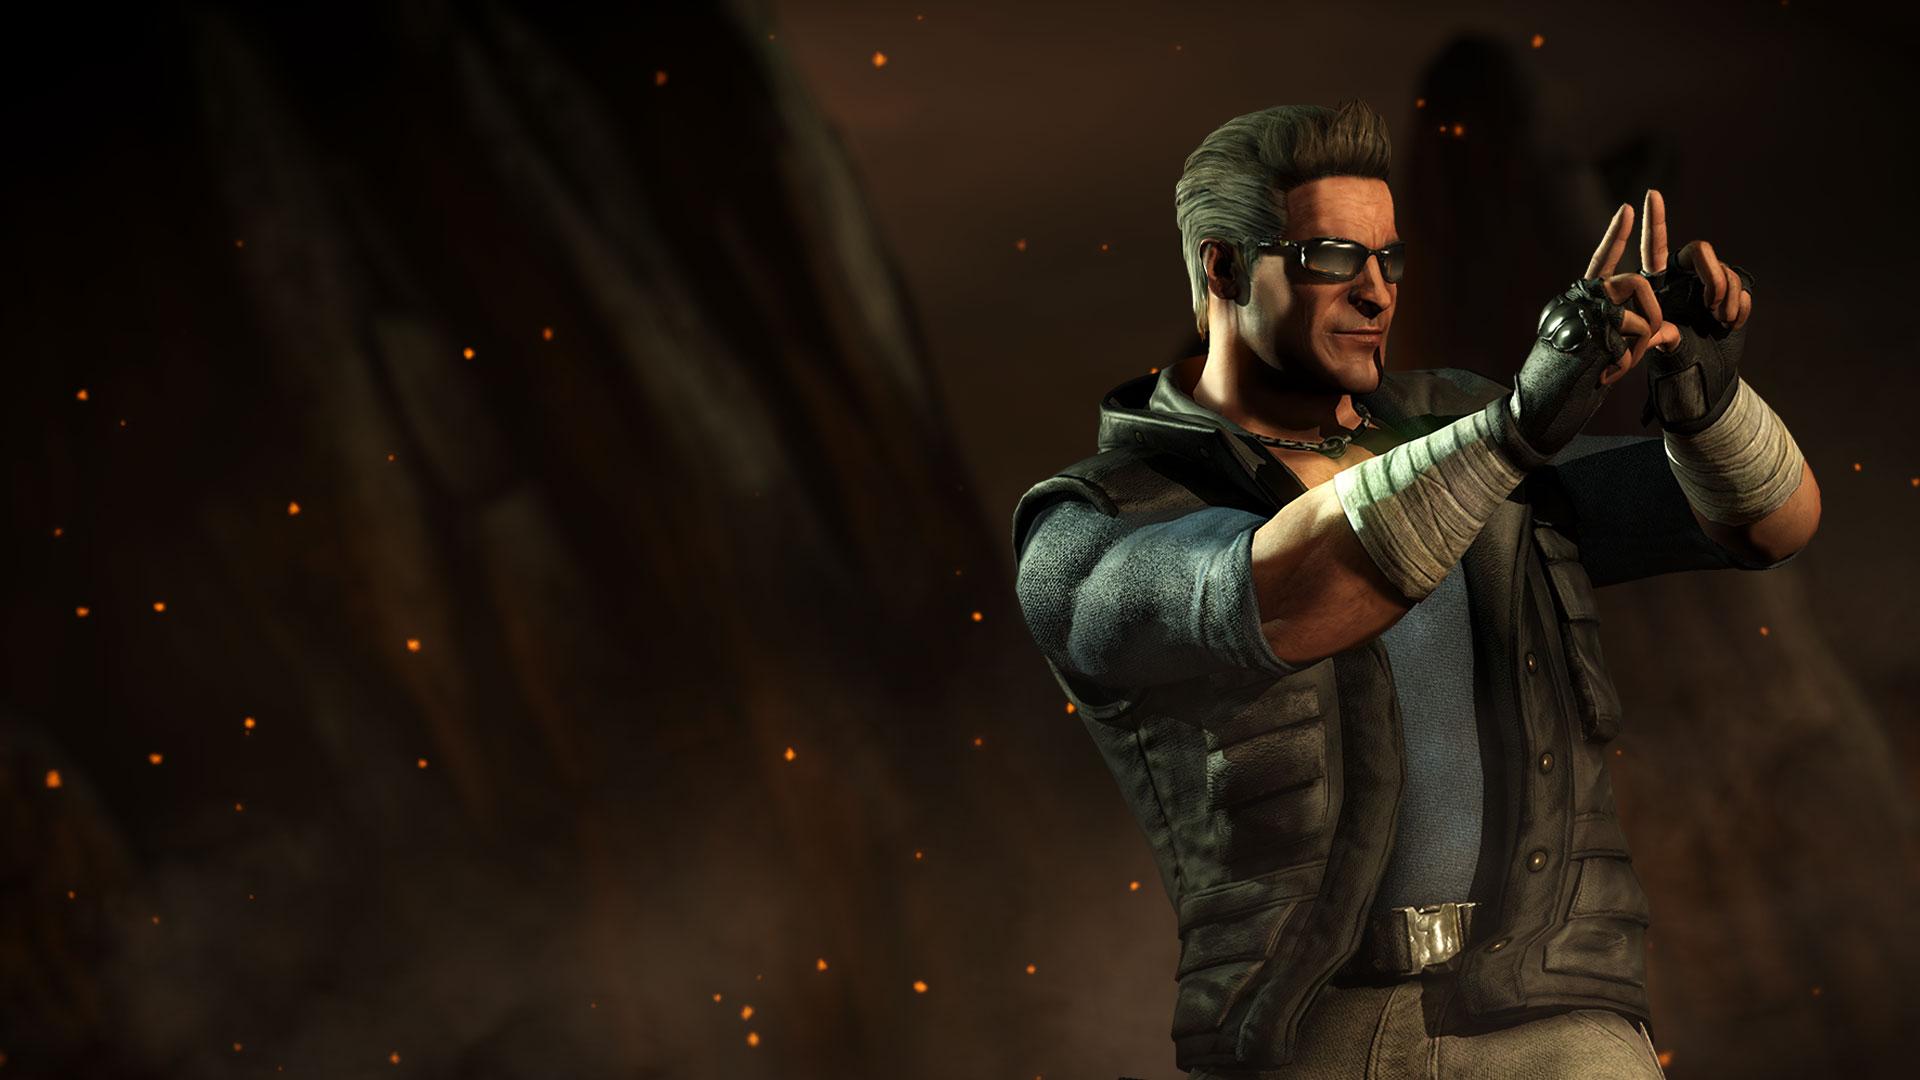 “Mortal Kombat X” Cage Family Reveals the Whole Family - Here's Johnny!